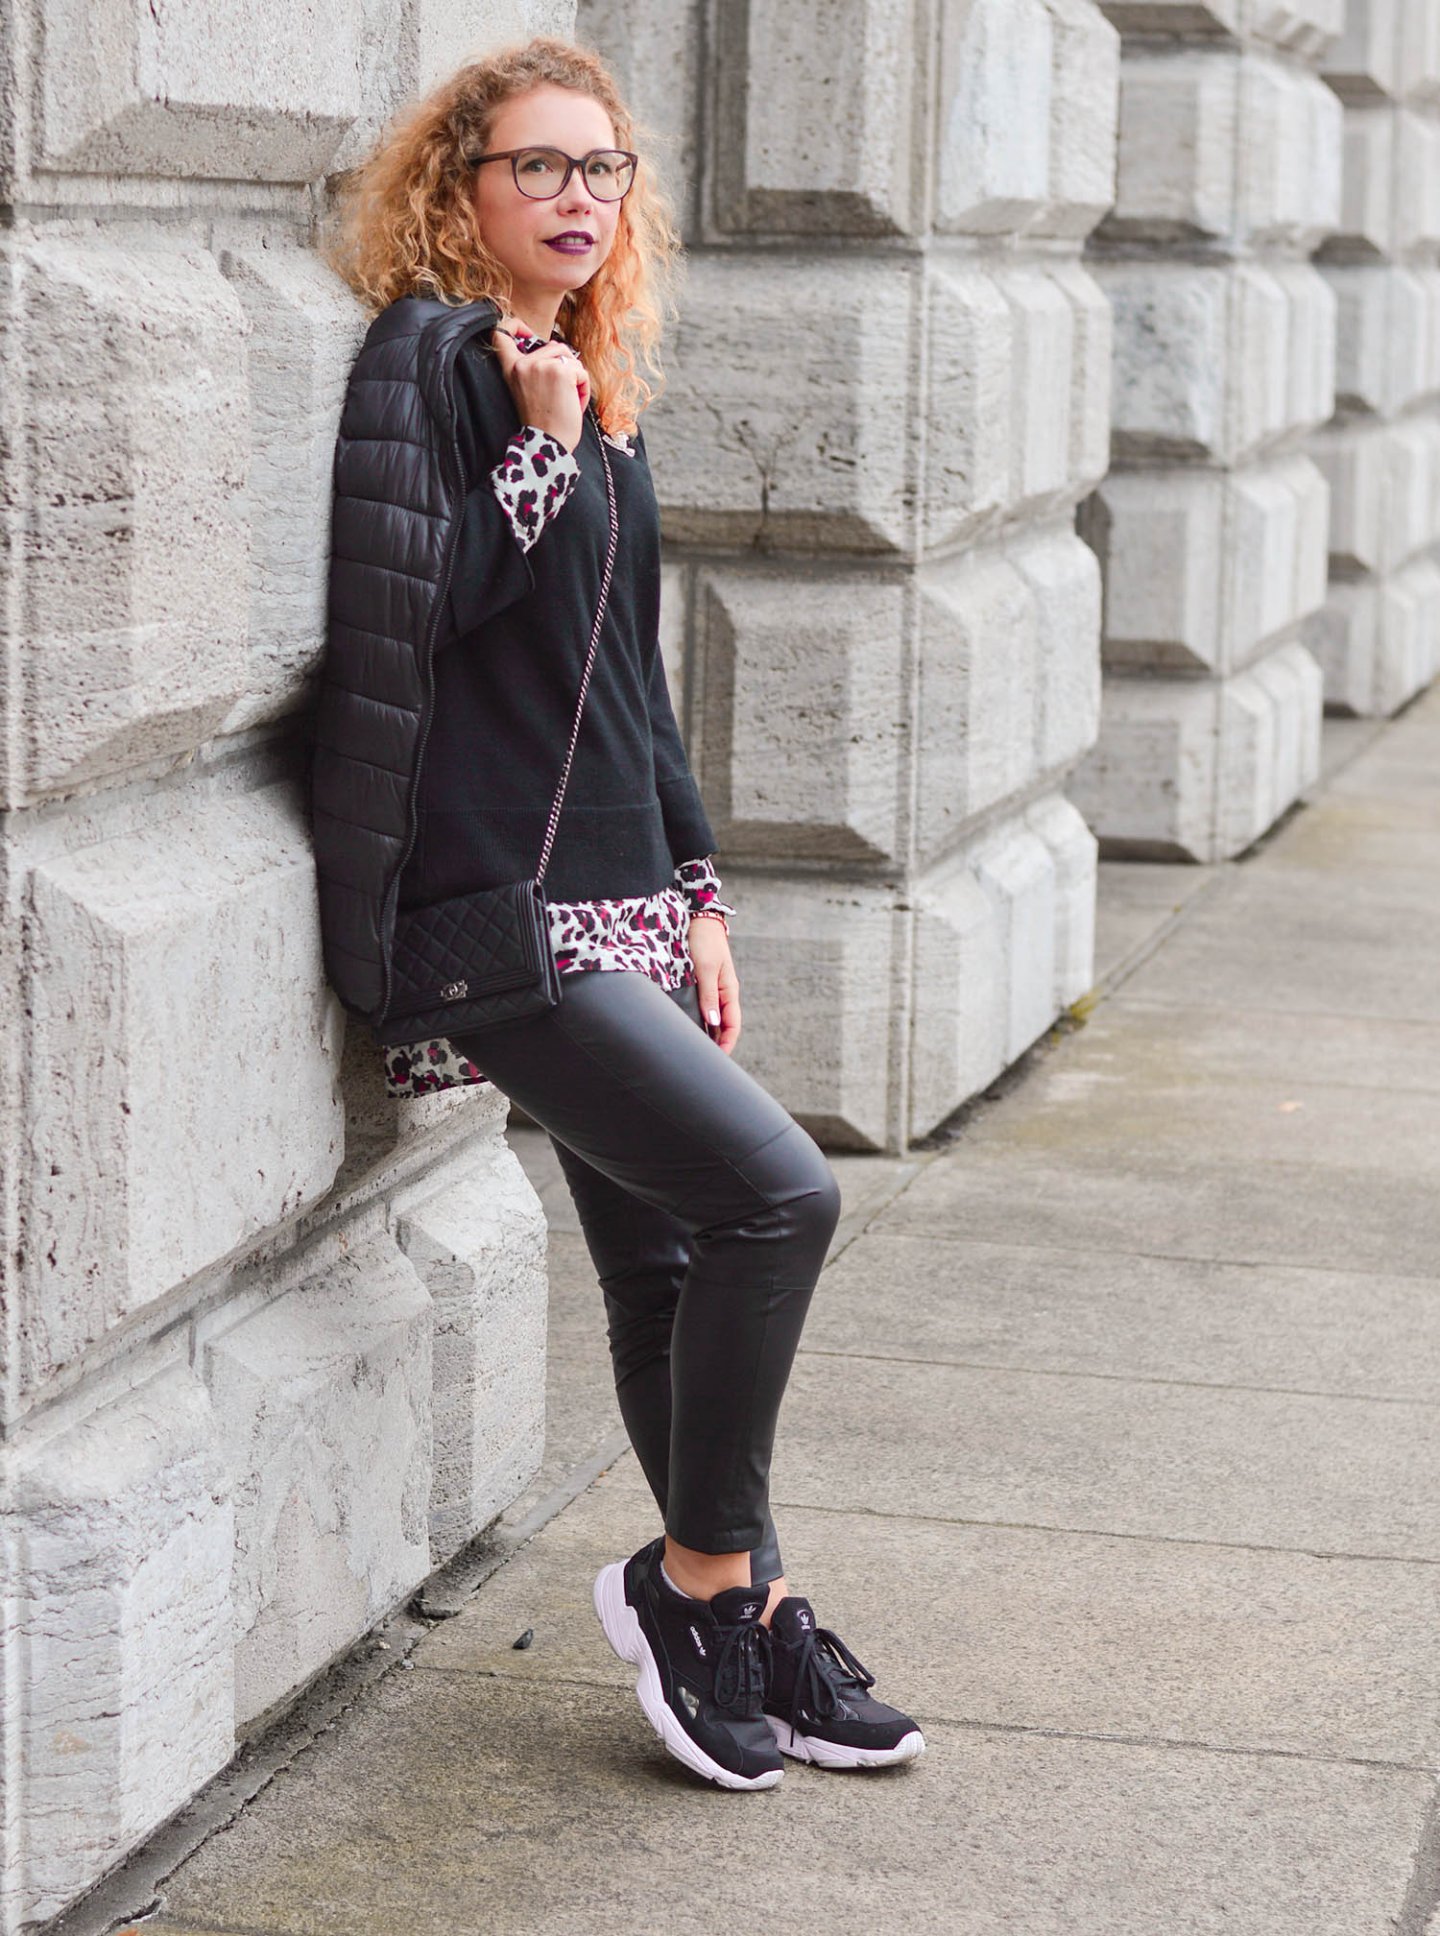 Sweater-and-Blouse-Combo-with-Quilted-Jacket-Leather-Pants-Adidas-Falcon-Kationette-Fashionblogger-Germany